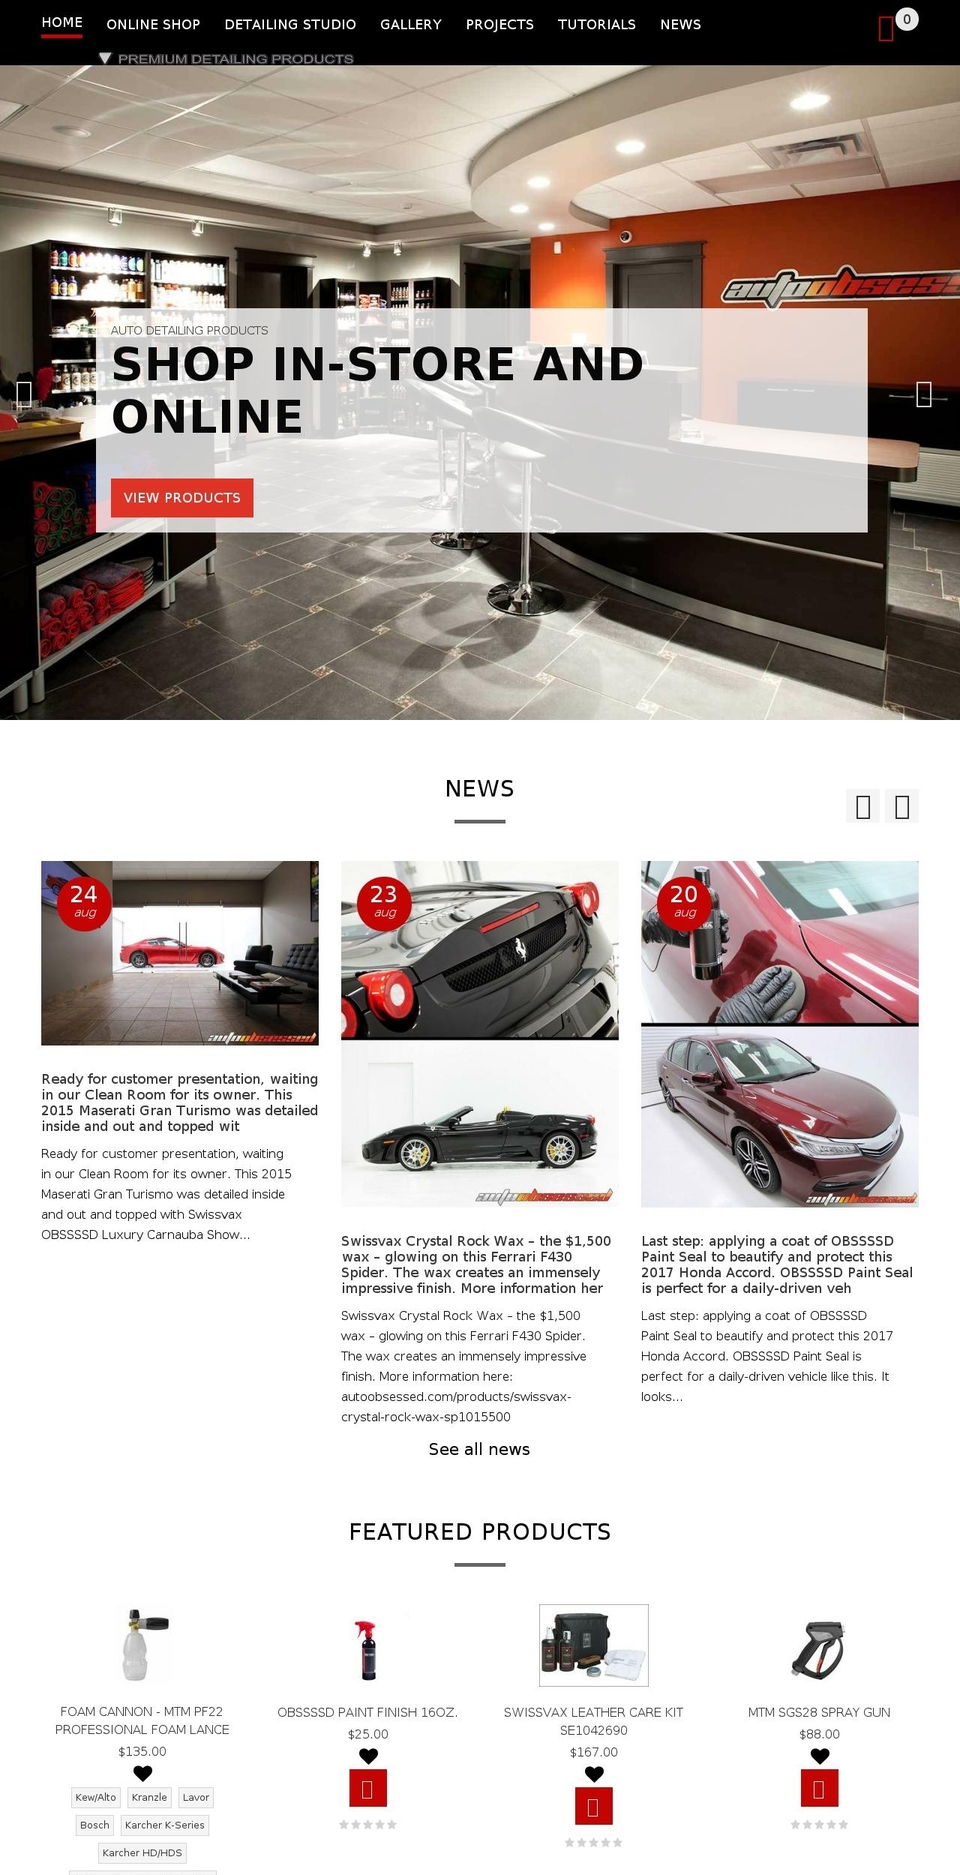 Copy of theme-export-createsimple-inc-myshopify... Shopify theme site example autoabsessed.com